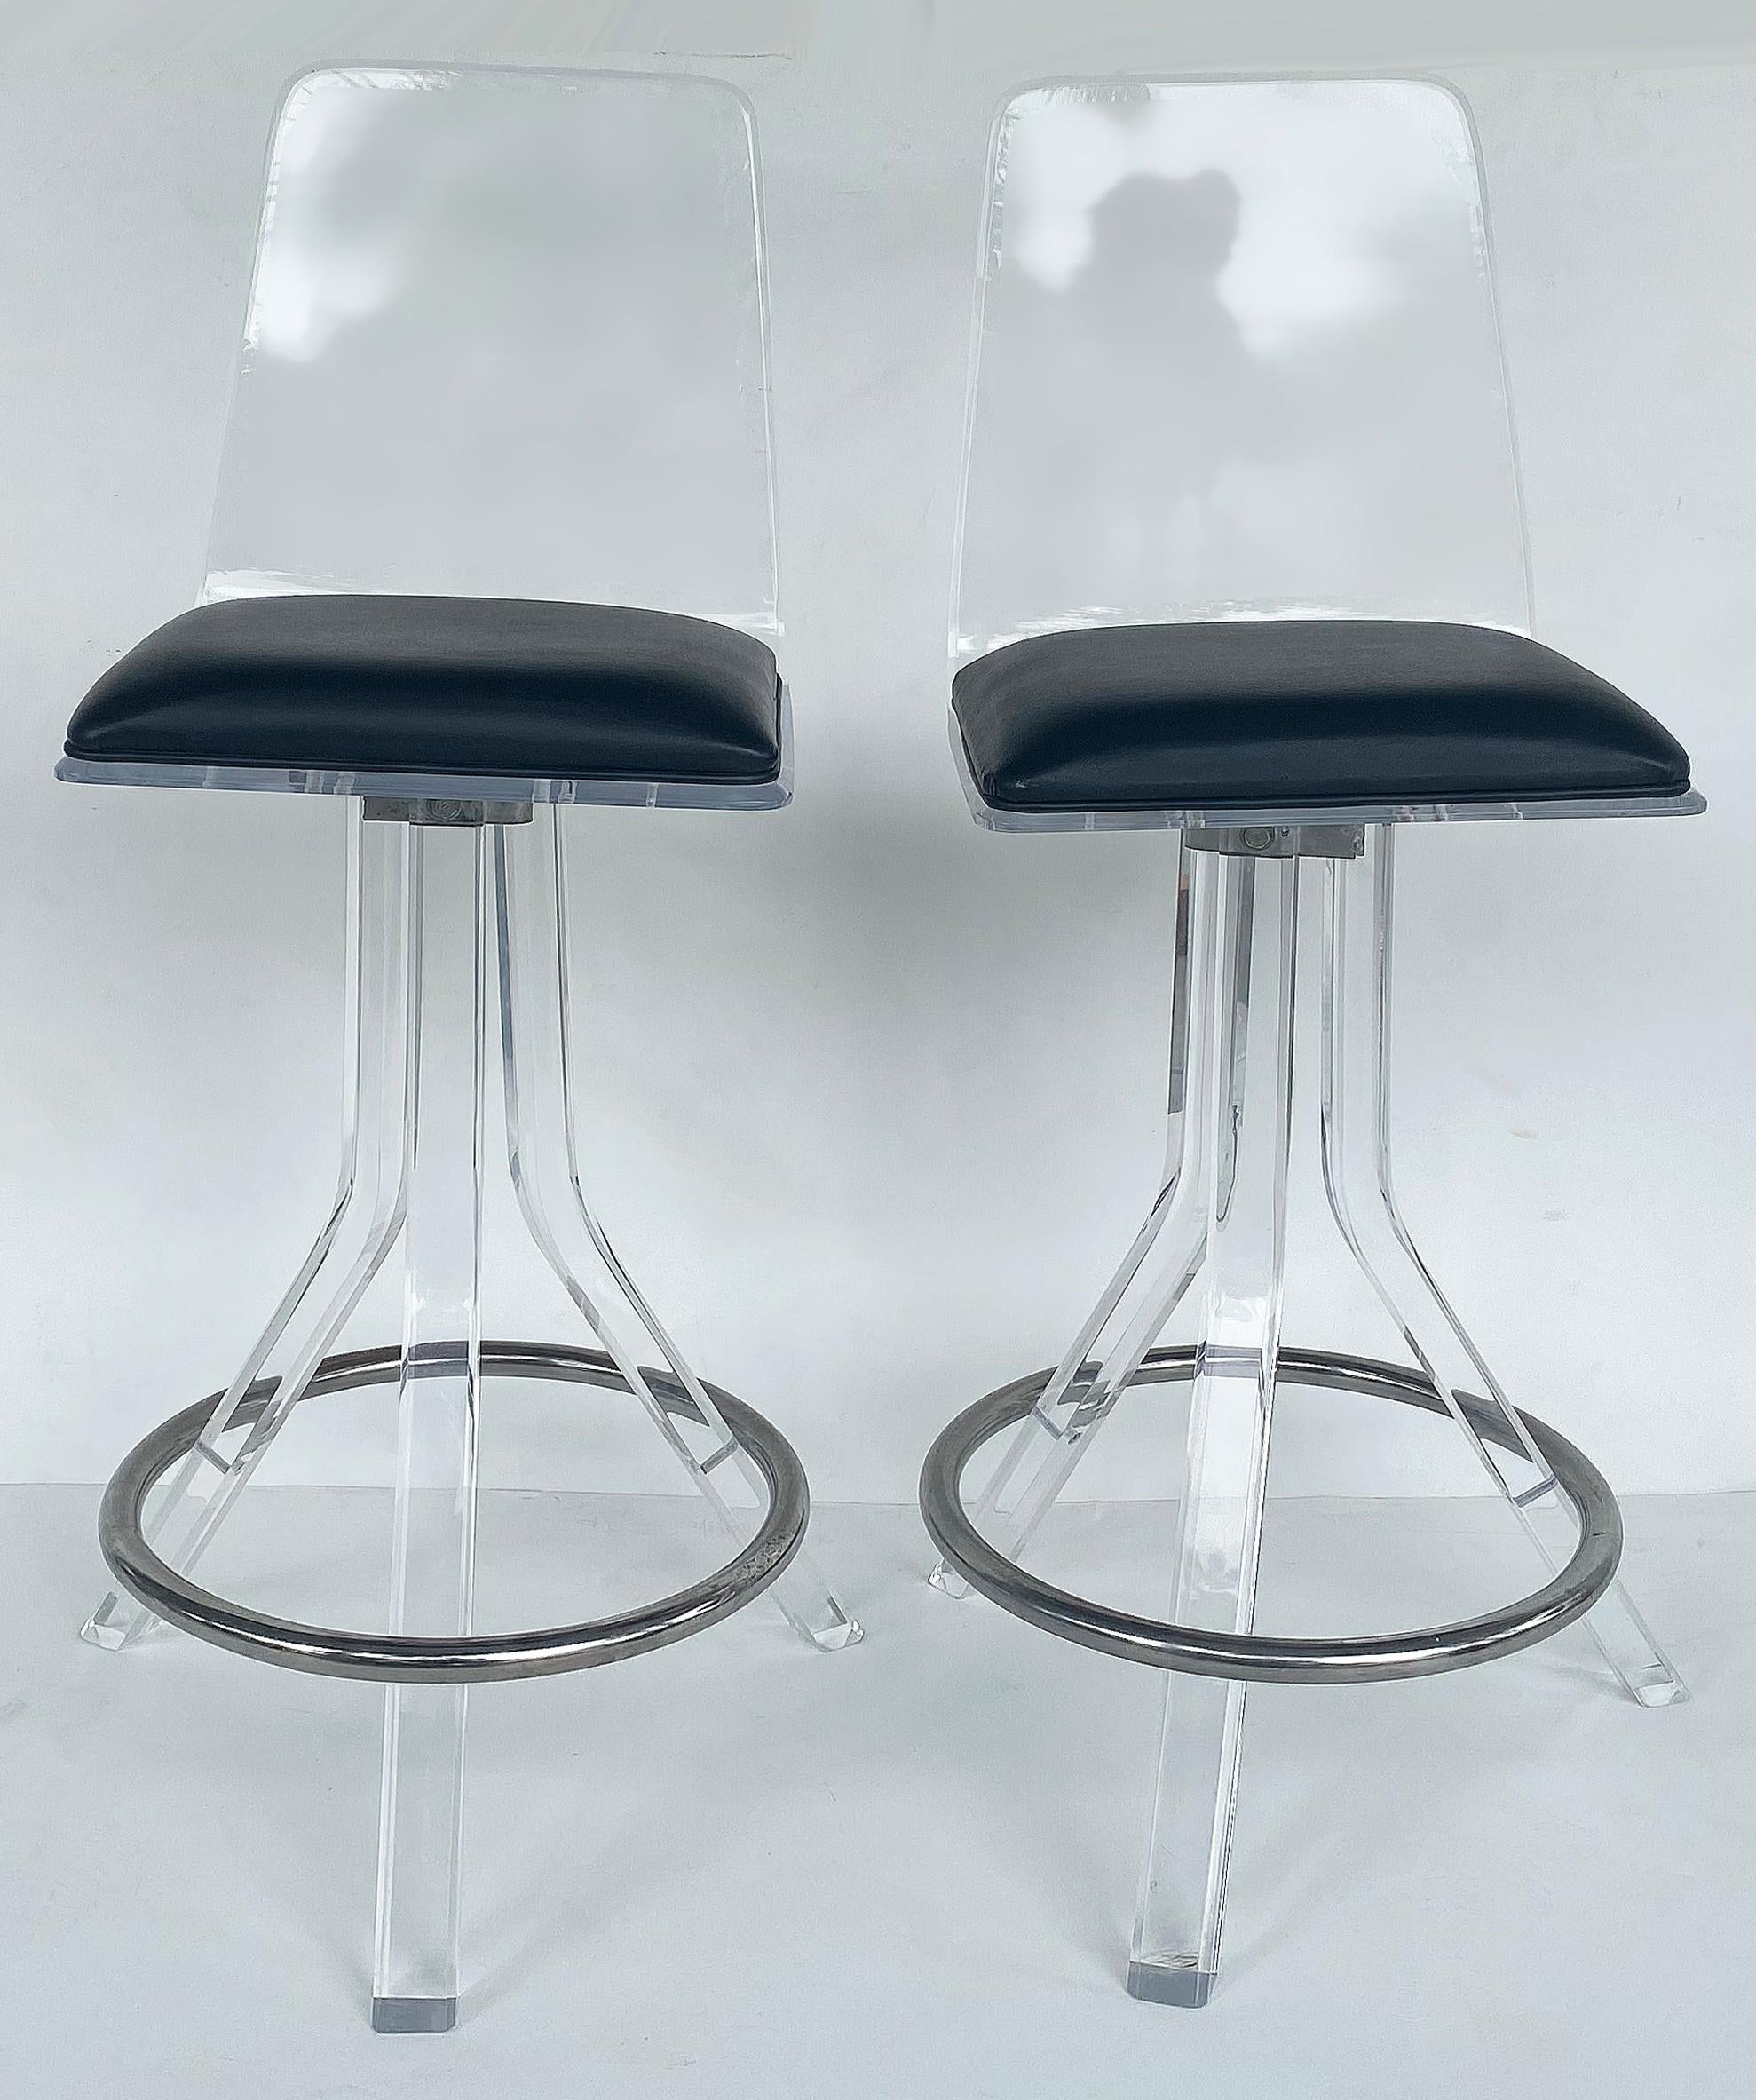 Lucite swivel bar stools attributed to Hill Manufacturing, a pair

Offered for sale is a pair of lucite swivel bar stools attributed to Hill Manufacturing Company. The molded clear lucite frames have black vinyl padded upholstered seats. Four legs